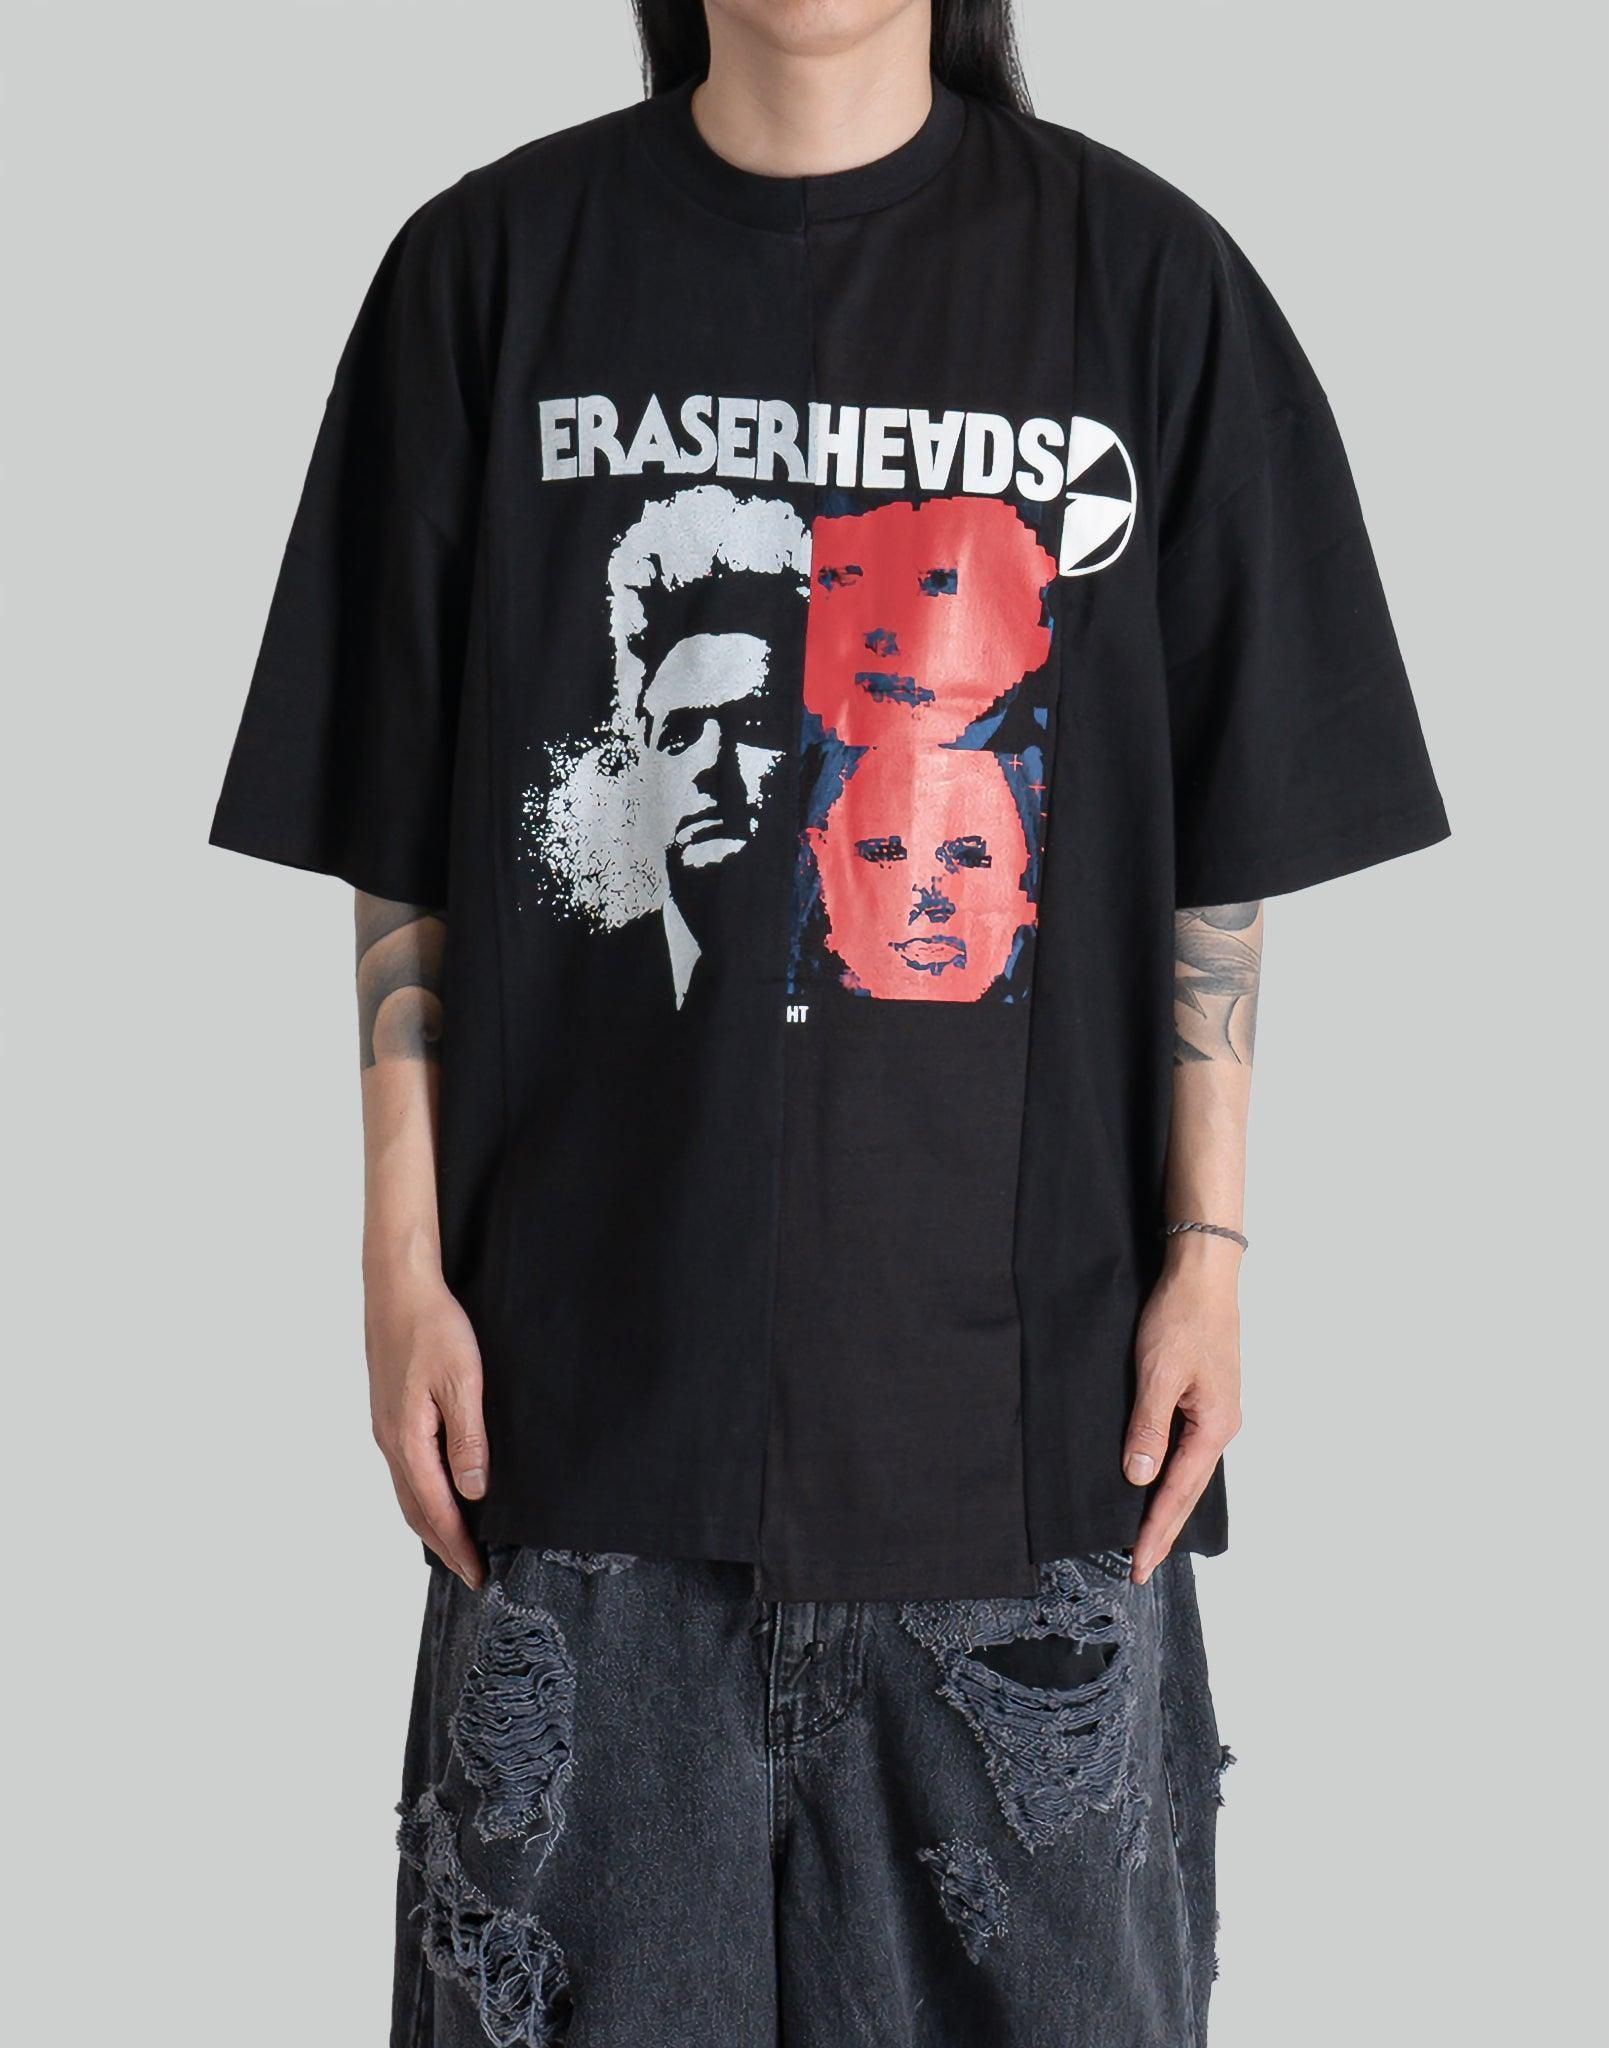 THE SALVAGES RECONSTRUCTED ERASERHEADS LOGO OS T-SHIRT - 082plus